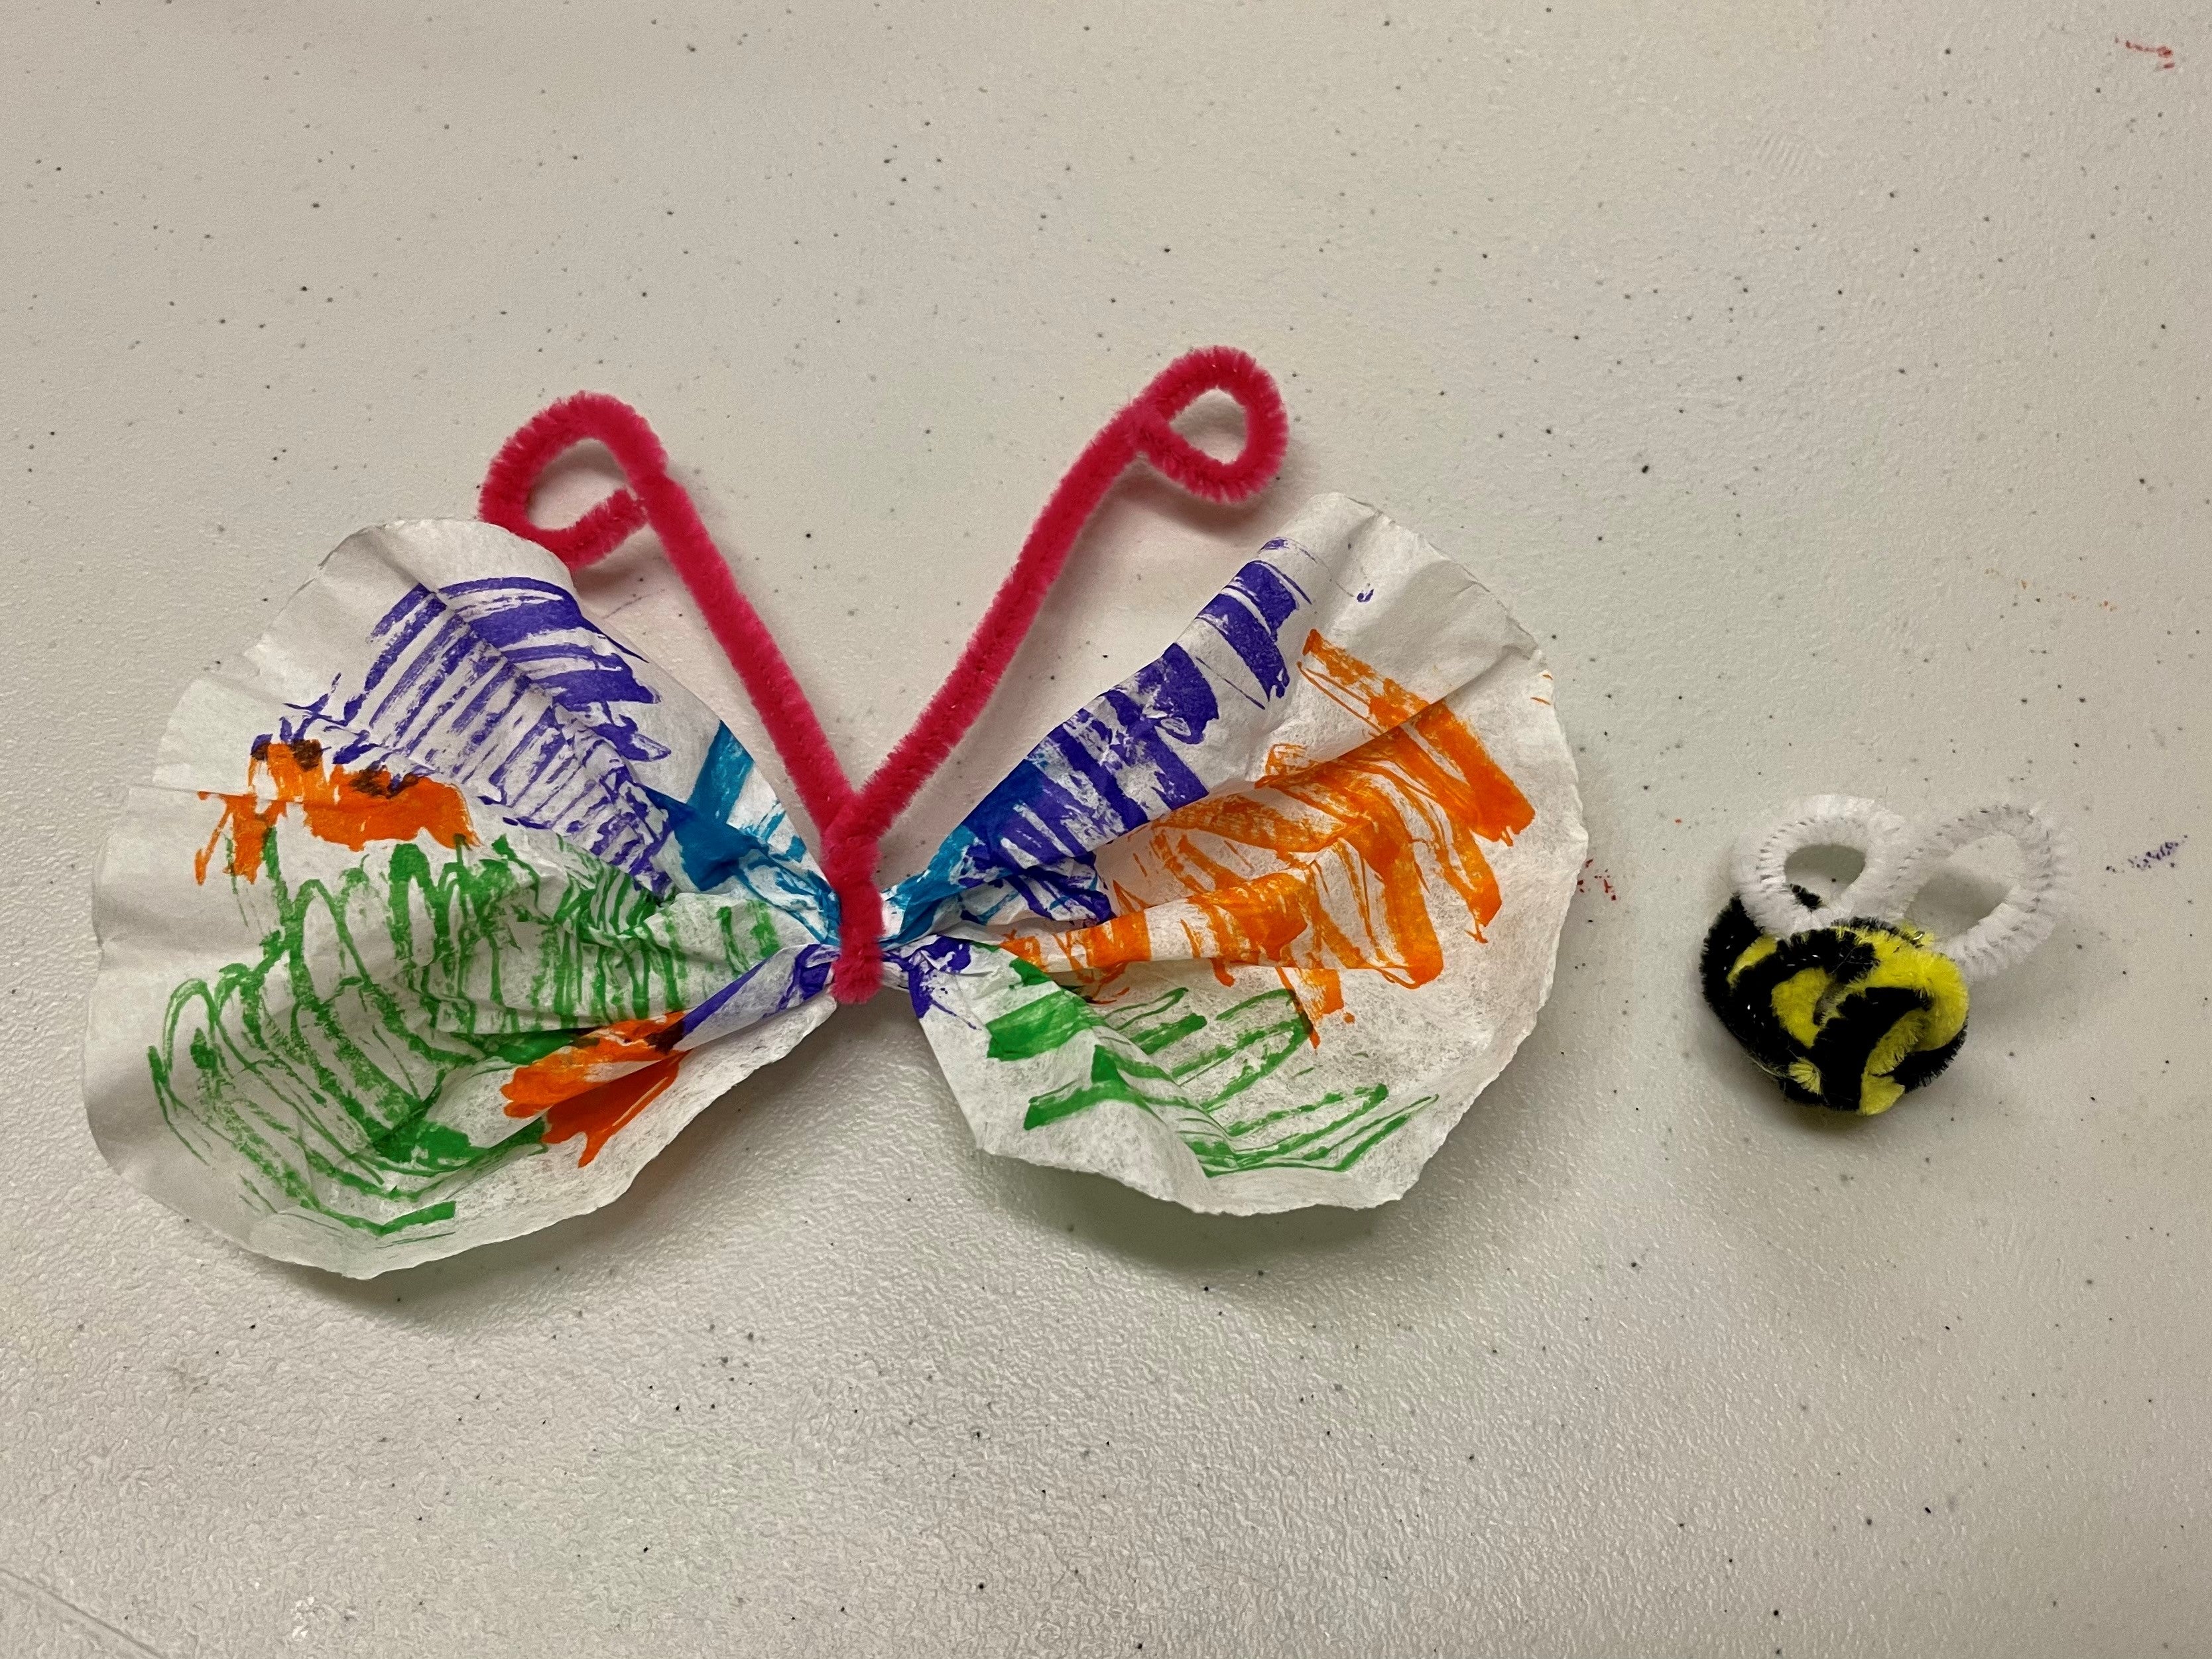 A coffee filter that's been colored and scrunched in the center to look like a butterfly, next to a bee made from black and yellow pipe cleaners